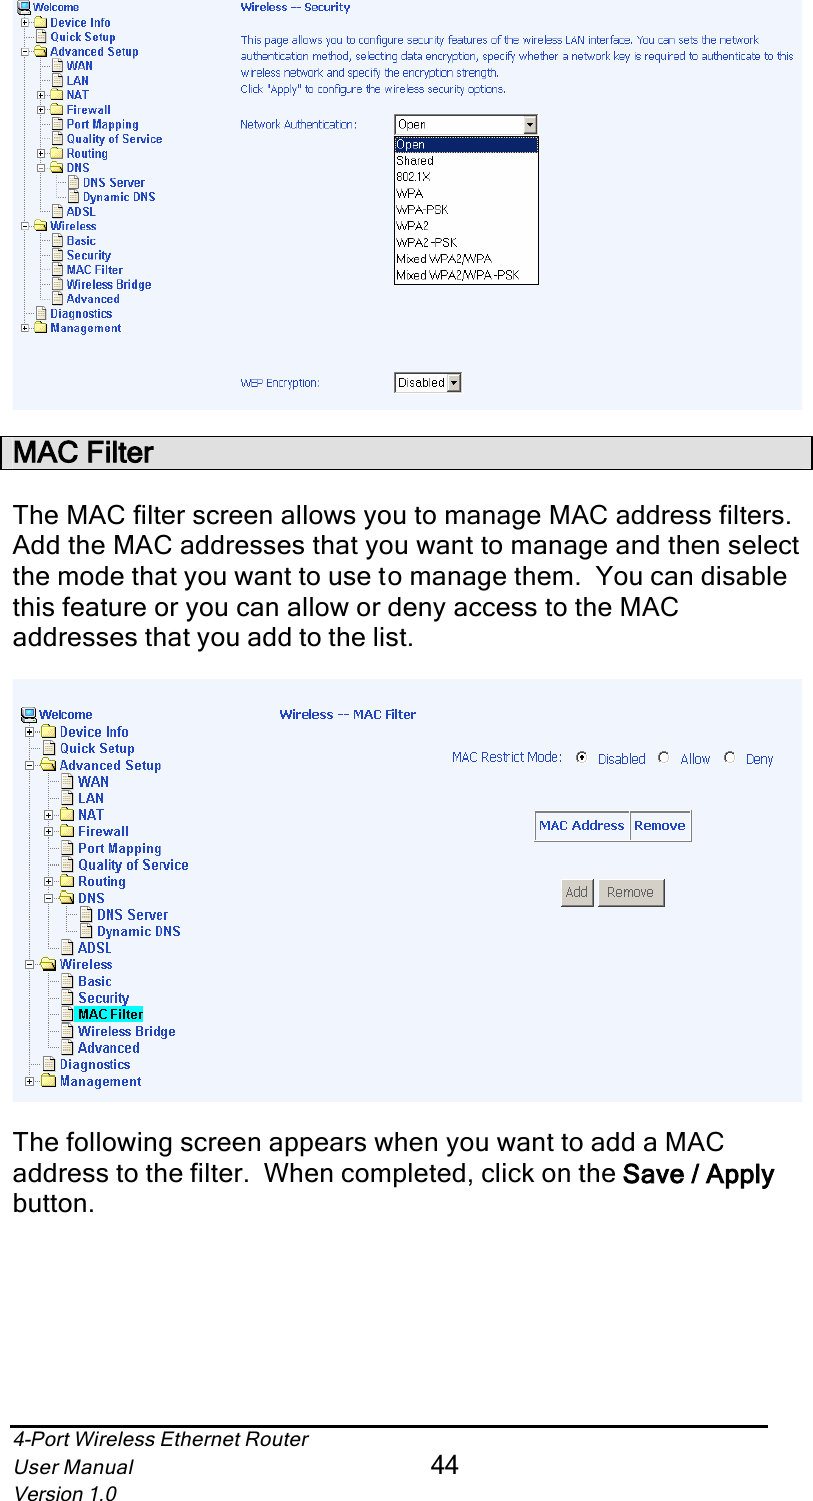 4-Port Wireless Ethernet RouterUser Manual44Version 1.0MAC FilterThe MAC filter screen allows you to manage MAC address filters.Add the MAC addresses that you want to manage and then select the mode that you want to use to manage them.  You can disable this feature or you can allow or deny access to the MAC addresses that you add to the list.The following screen appears when you want to add a MAC address to the filter.  When completed, click on the Save / Apply button.